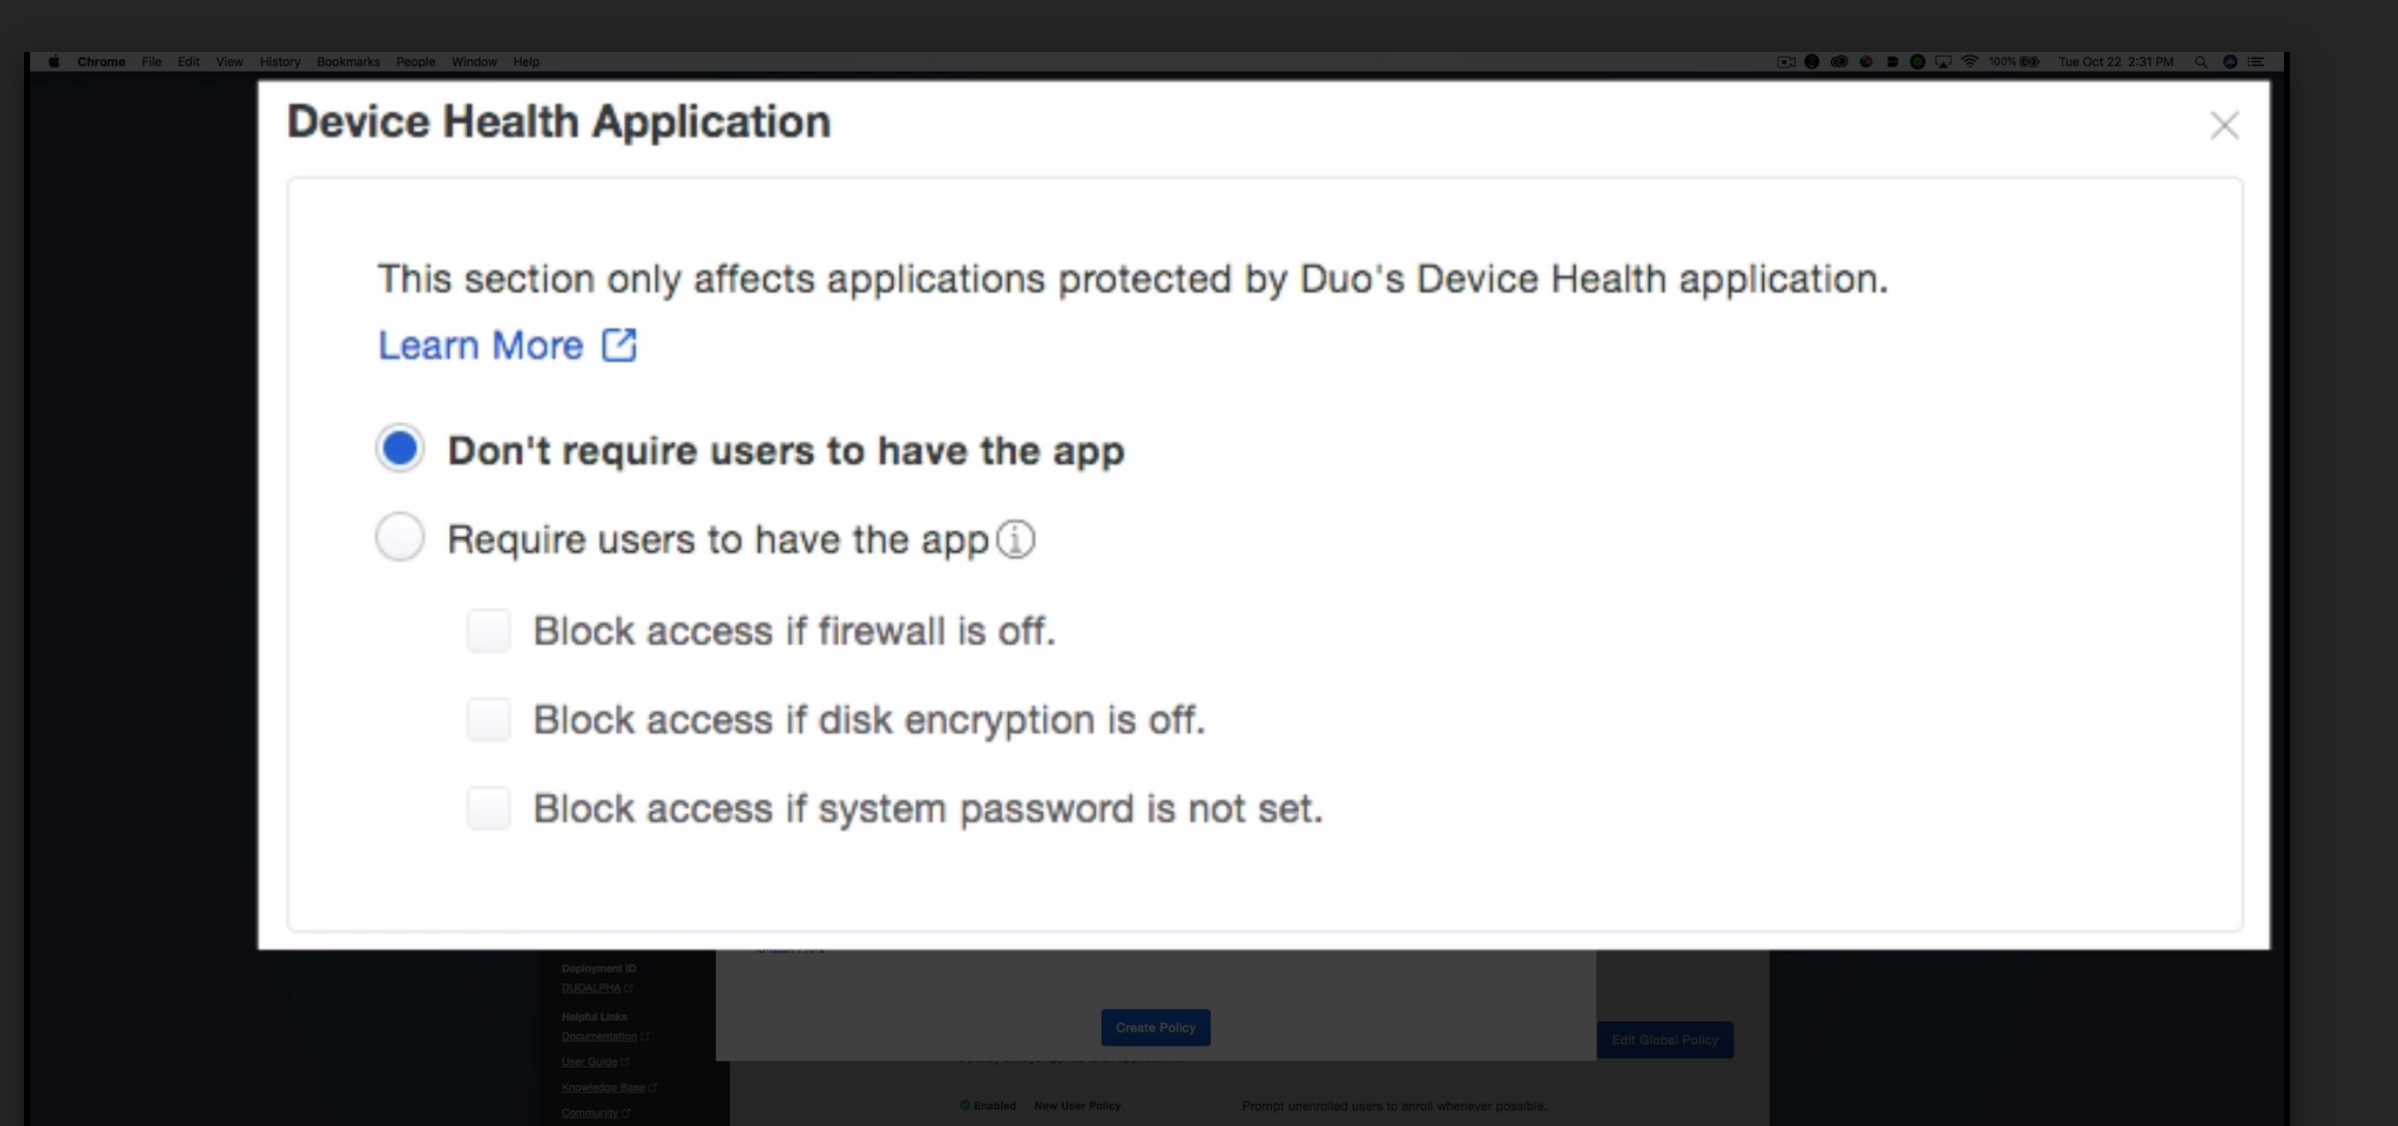 Screen: This section only affects apps protected by Duo's Device Health app, w/ Don't require users to have the app selected.